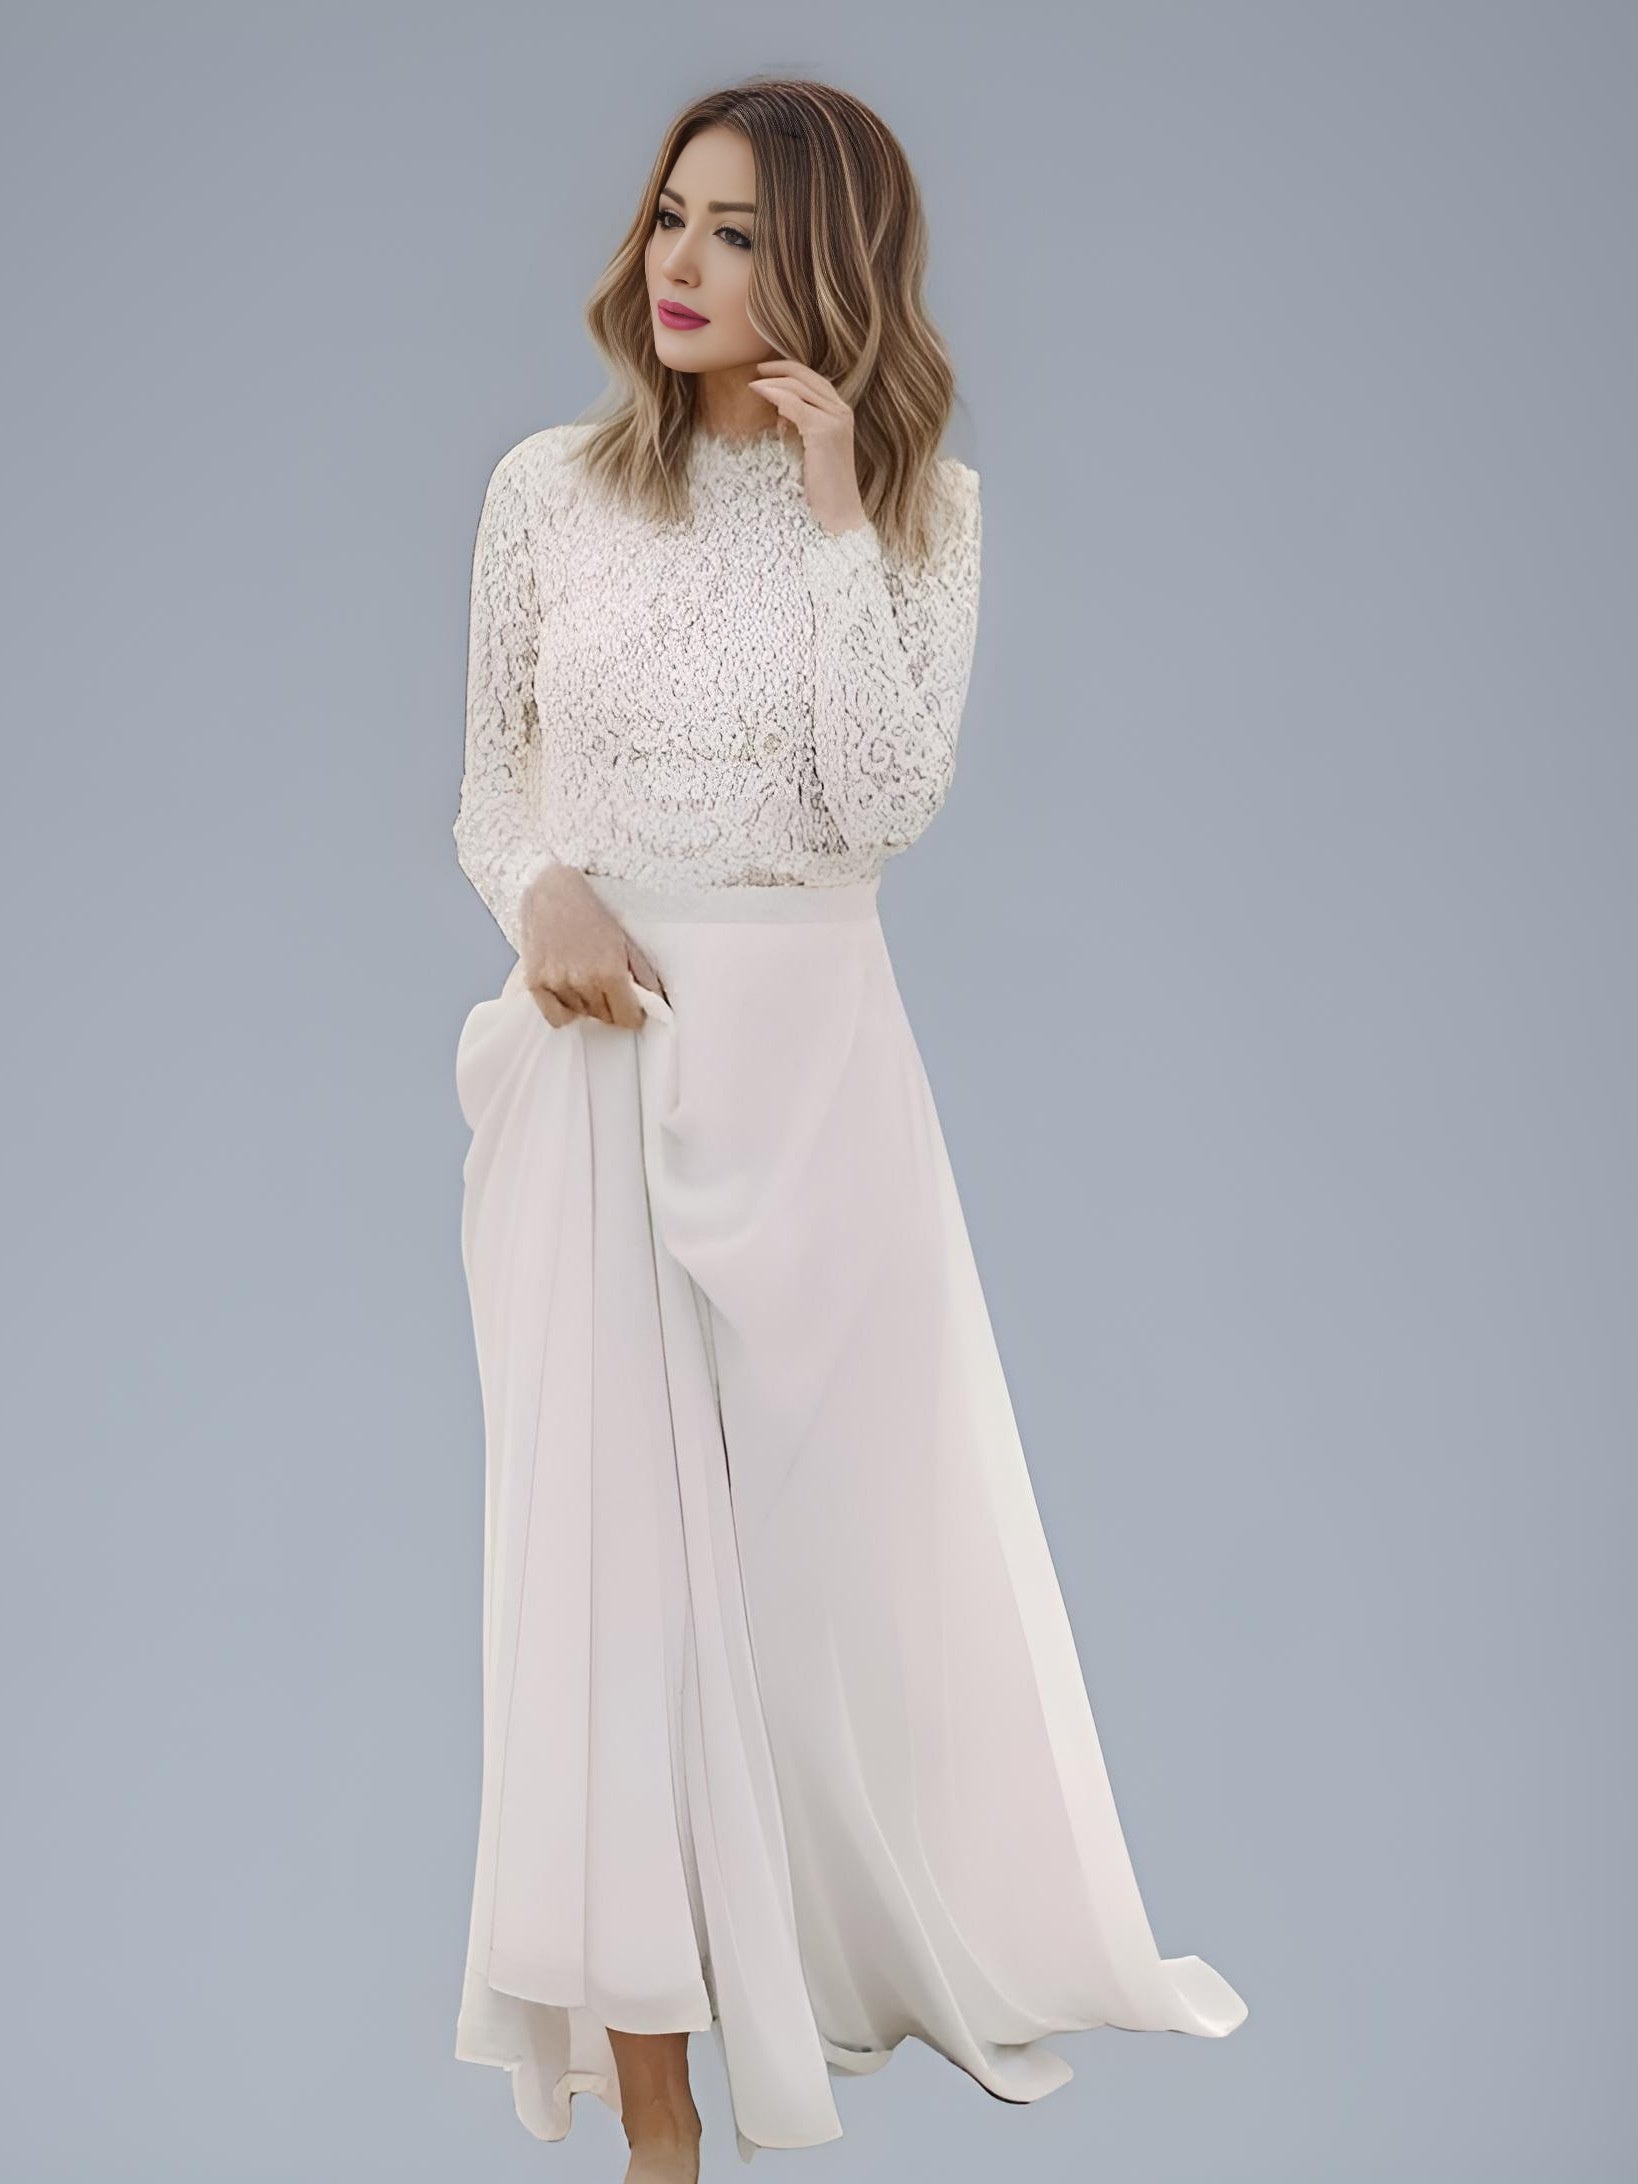 A-line Chiffon Skirt with Lace Top Wedding Dress for Modern Boho Bride